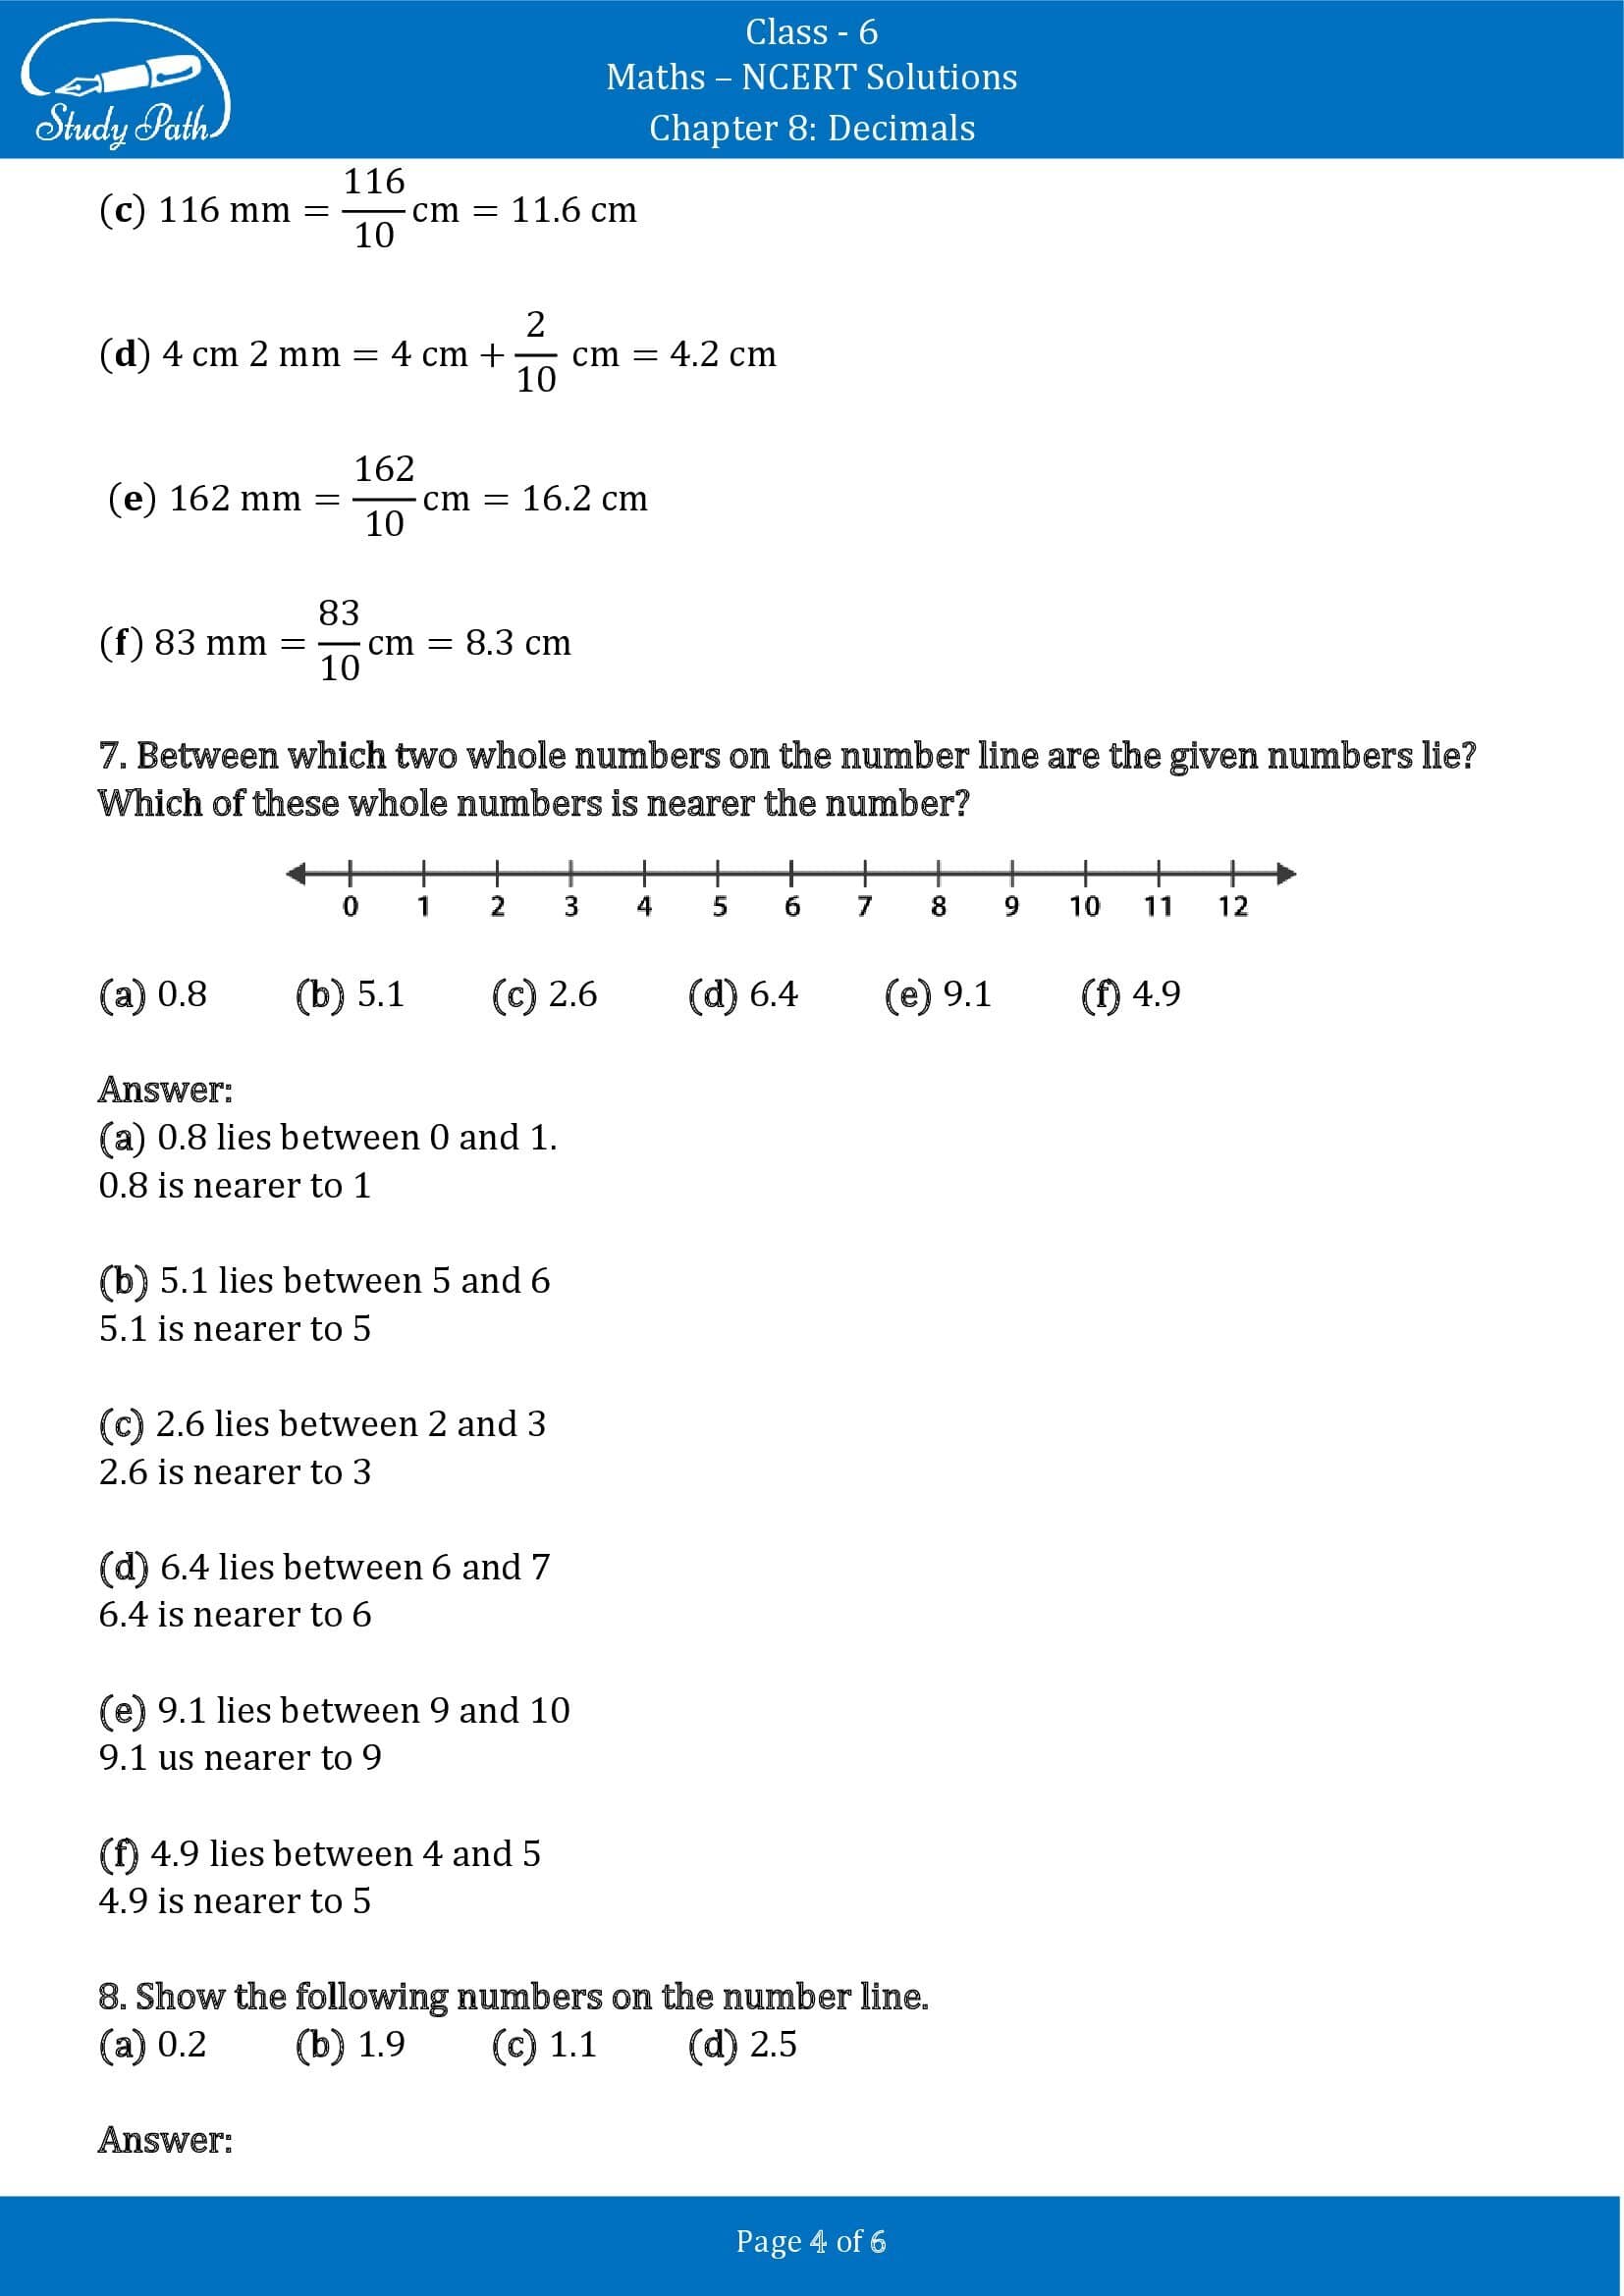 NCERT Solutions for Class 6 Maths Chapter 8 Decimals Exercise 8.1 00004